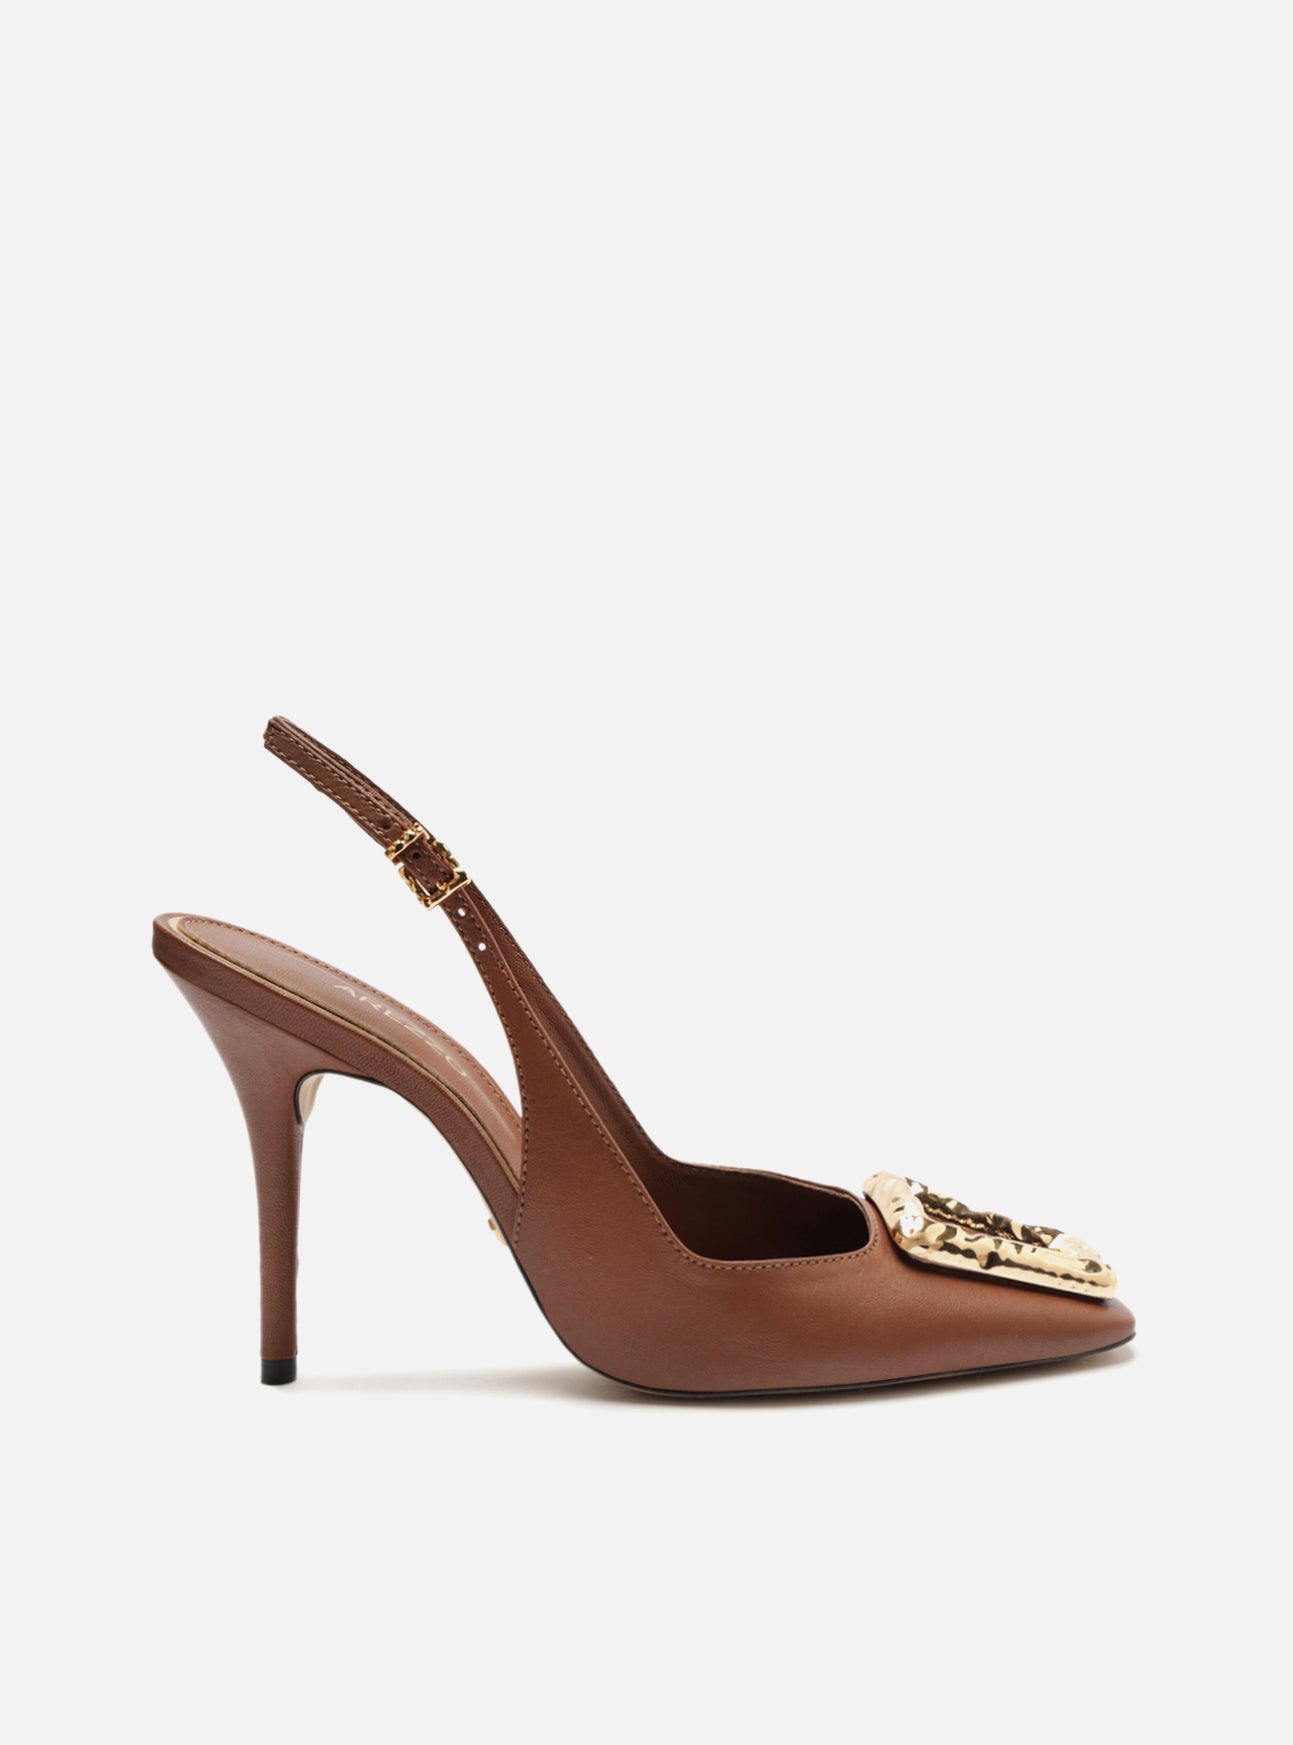 Brown leather pumps with high stiletto heels and square toes. It is closed and has a perforated metal piece on the vamp.